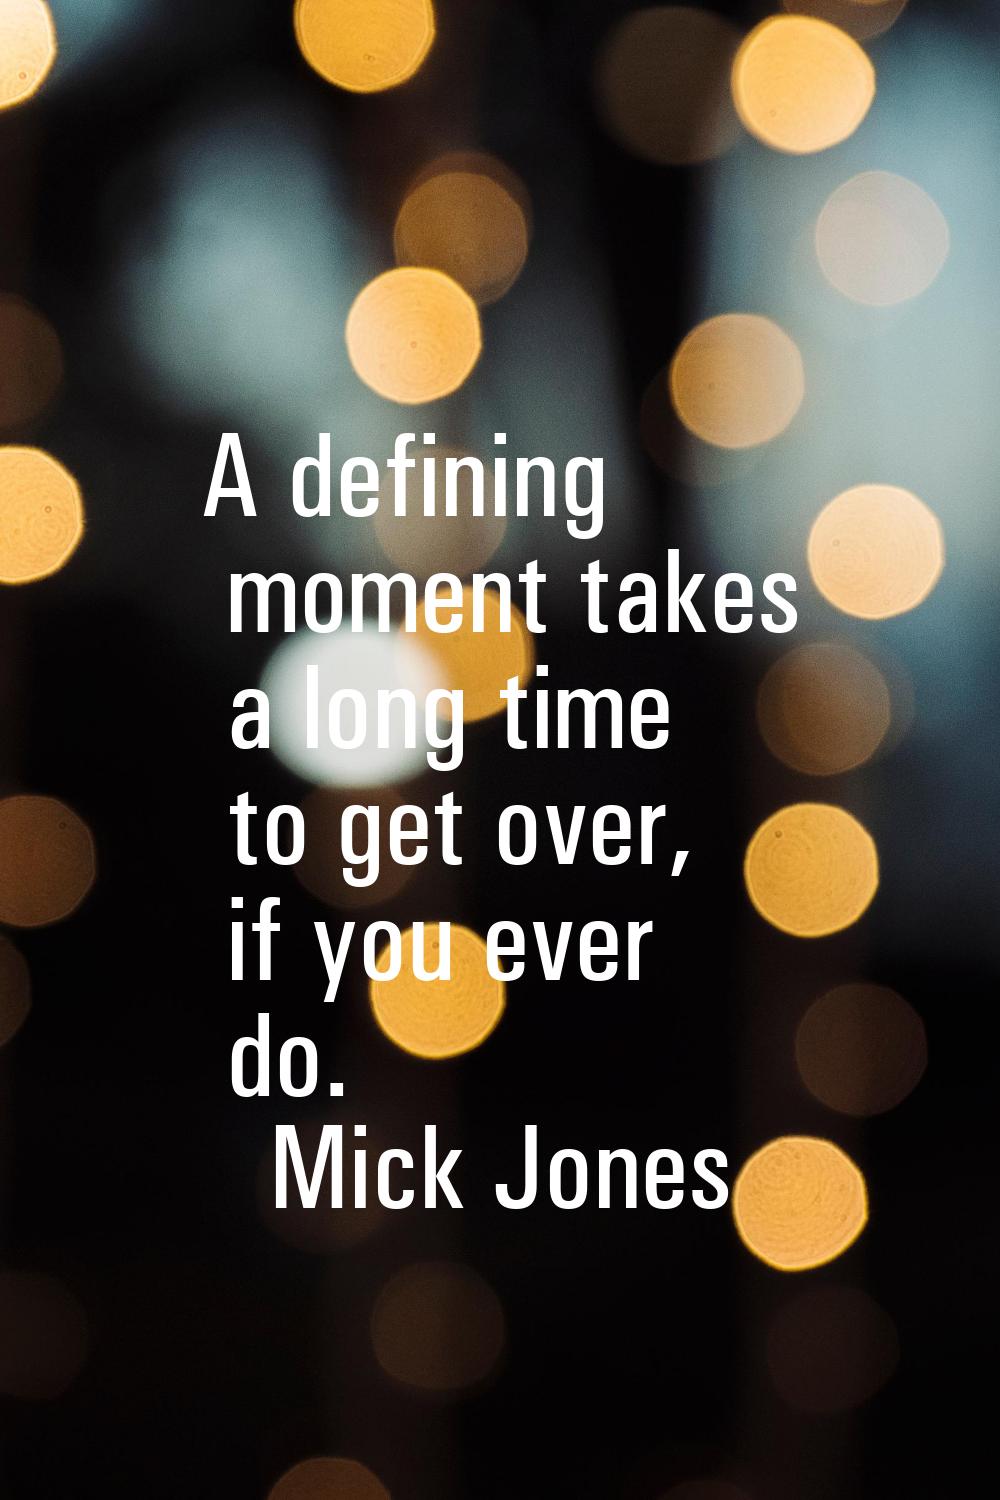 A defining moment takes a long time to get over, if you ever do.